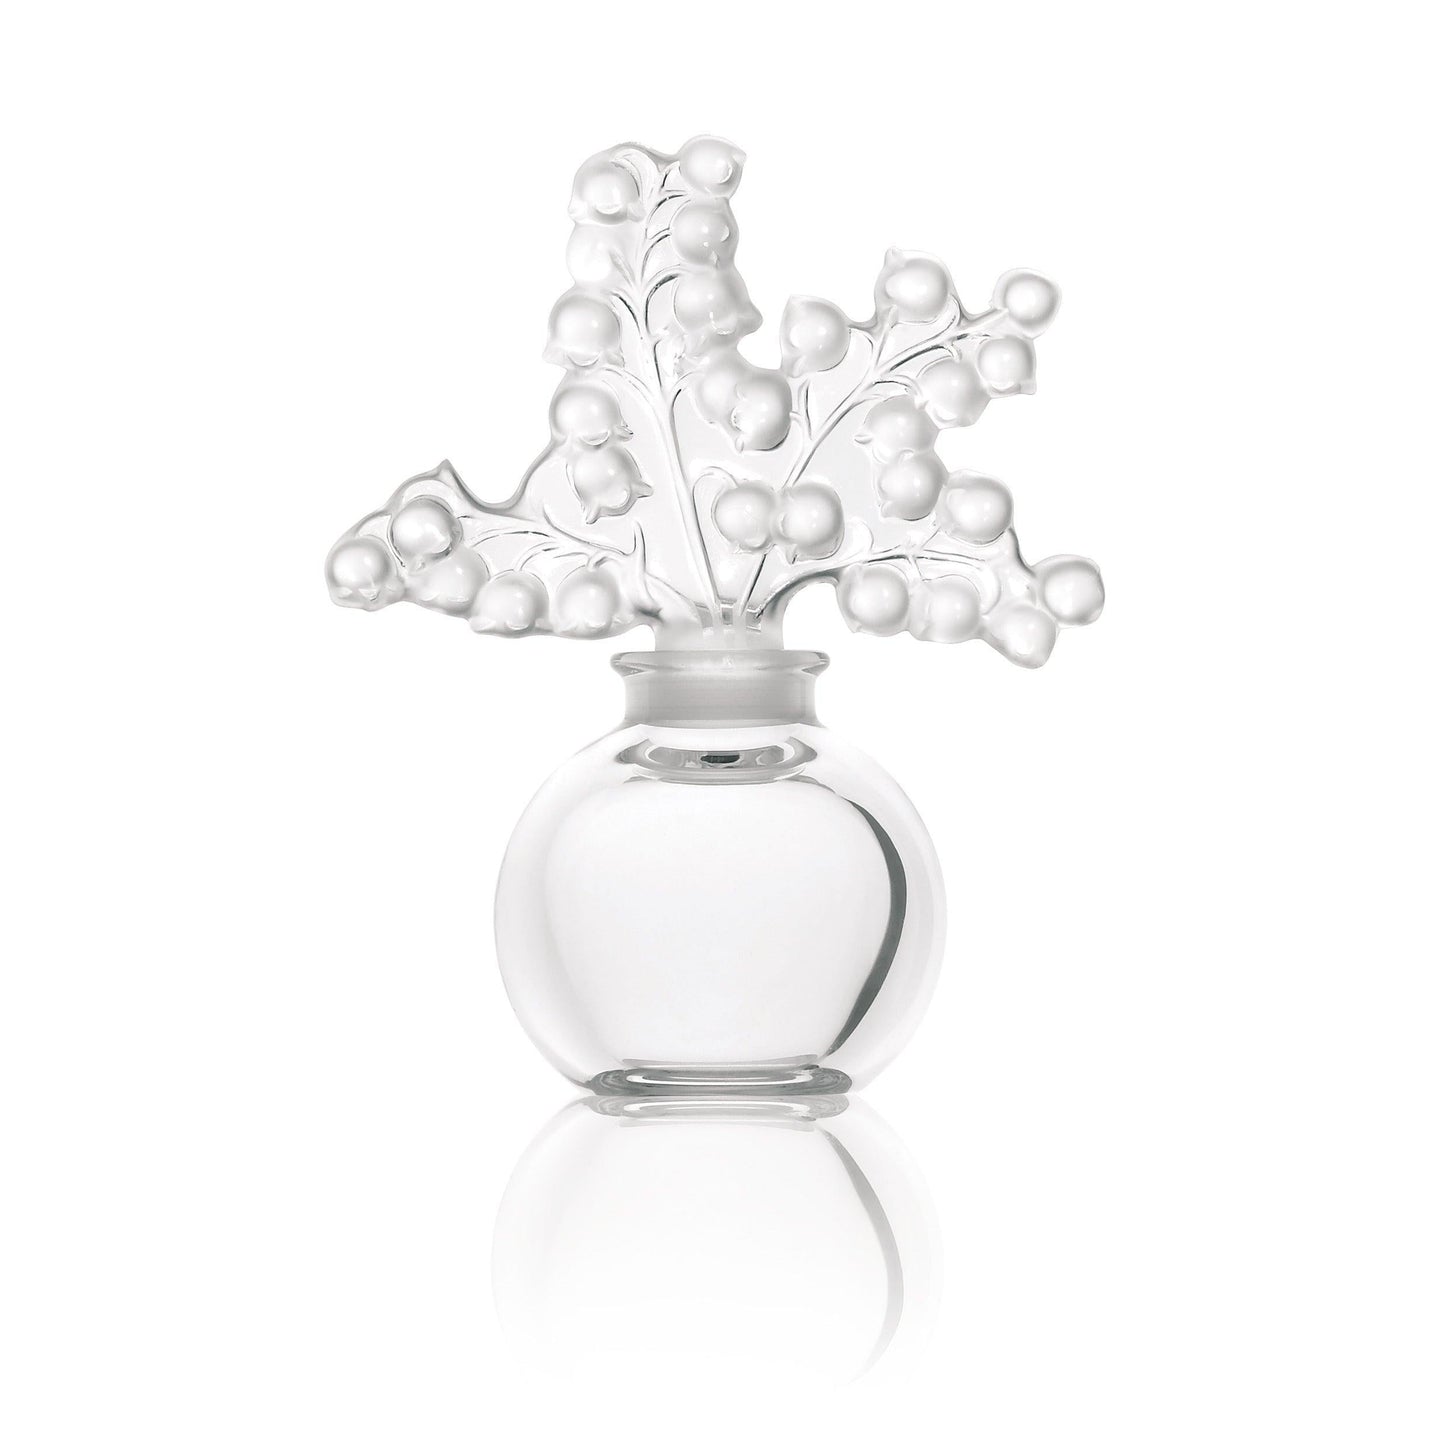 Clairefontaine Perfume Bottle (Lalique) - Gallery Gifts Online 